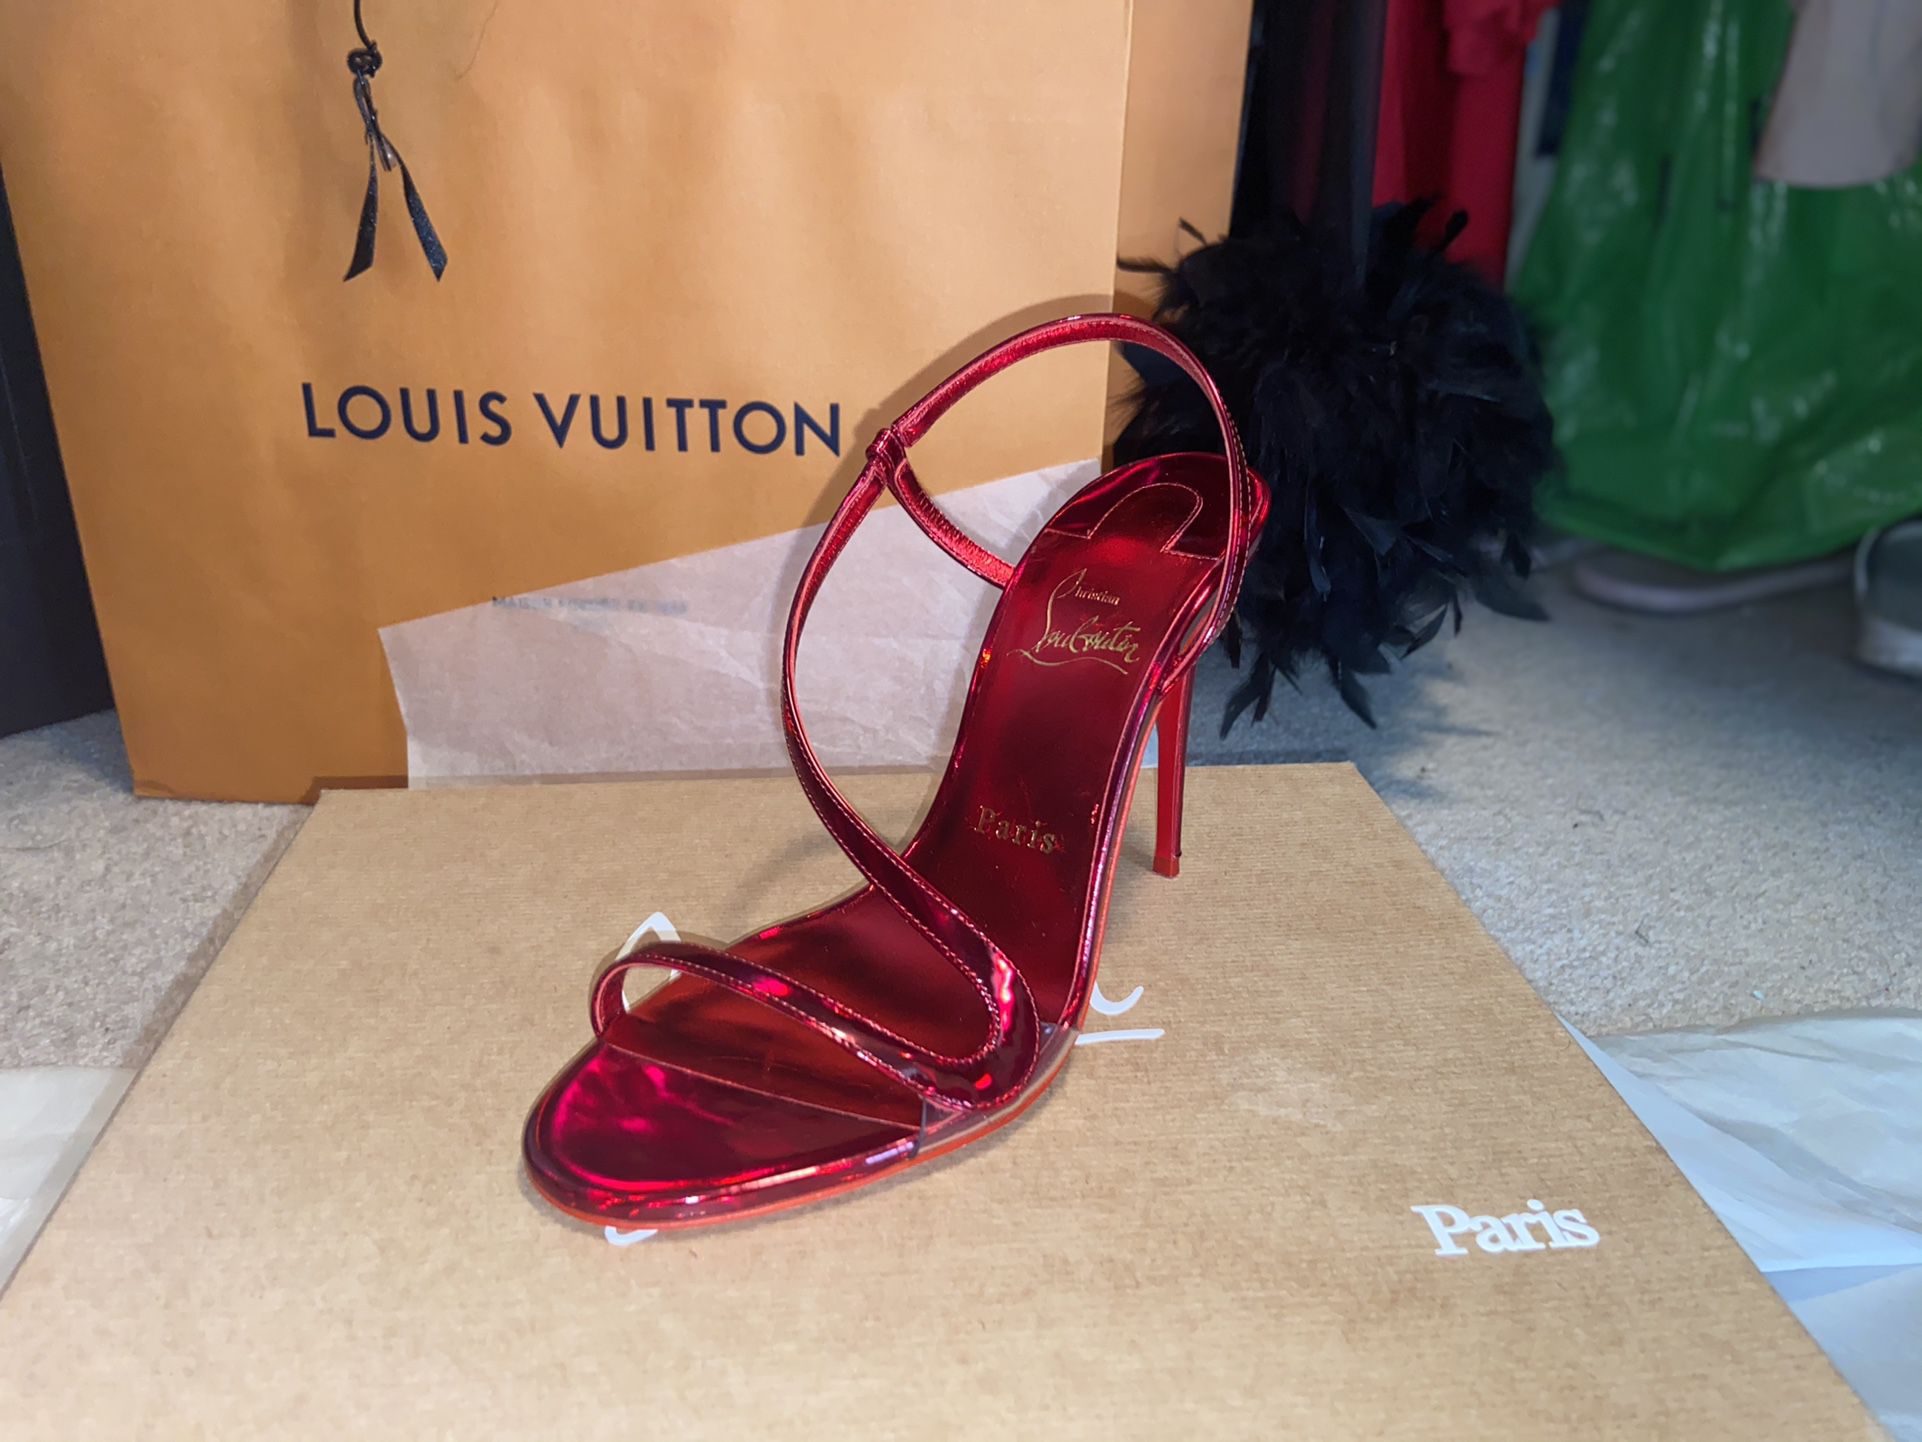 Christian louboutin Rosalie Patent Red Sole Stiletto Sandals